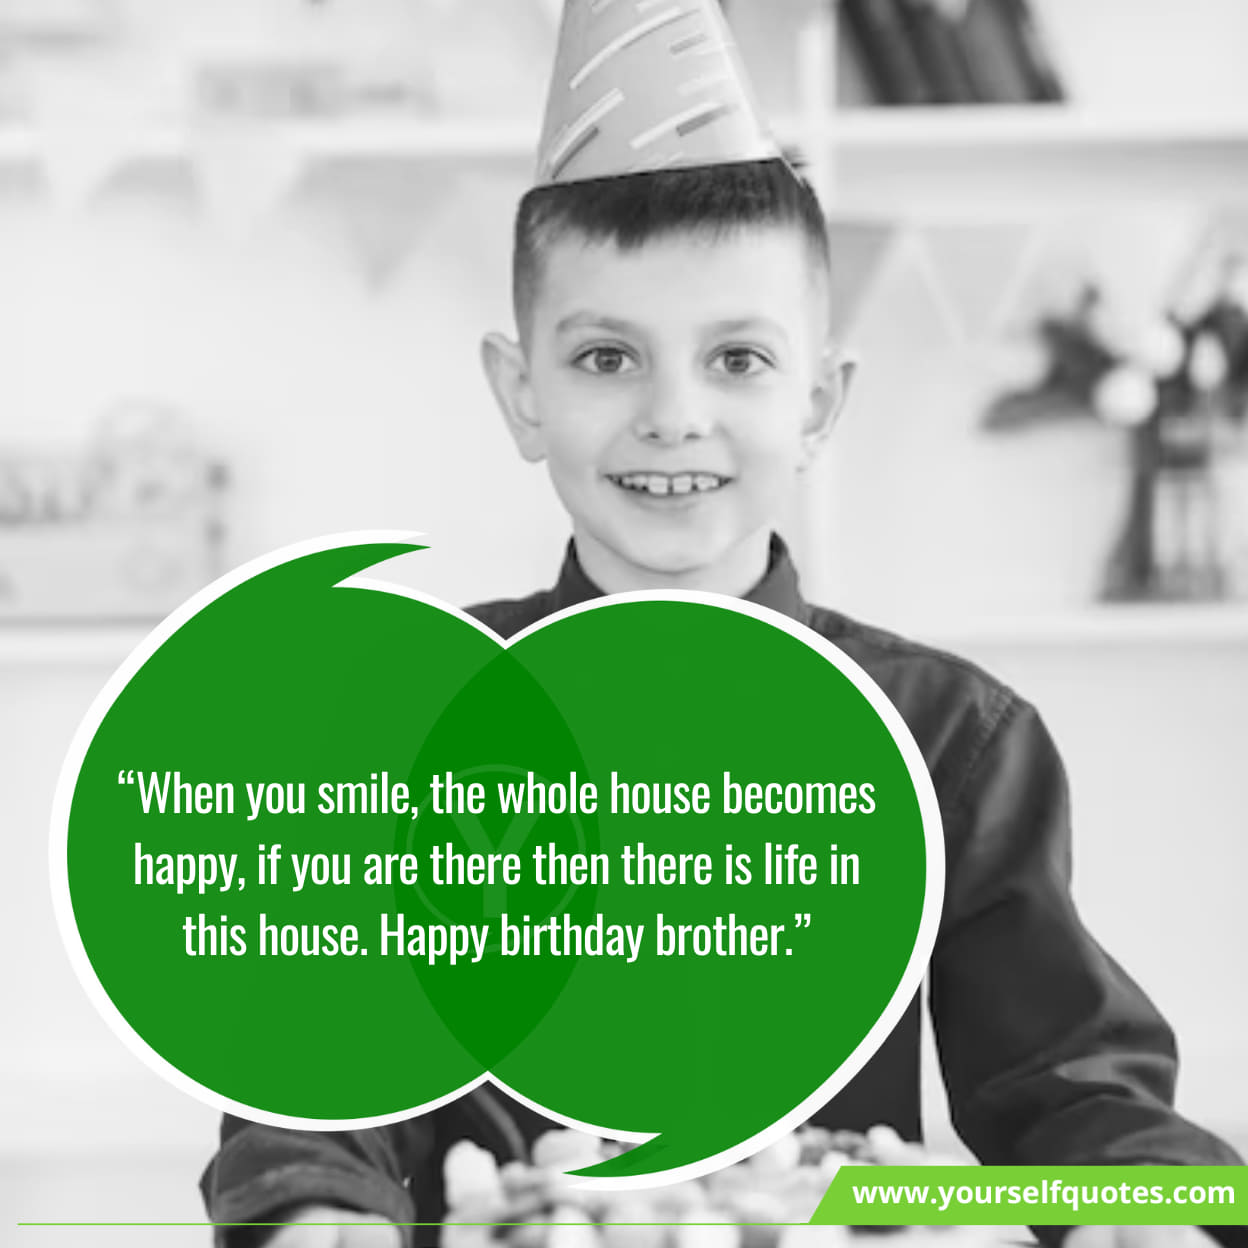 Heartfelt Birthday Messages for Brother